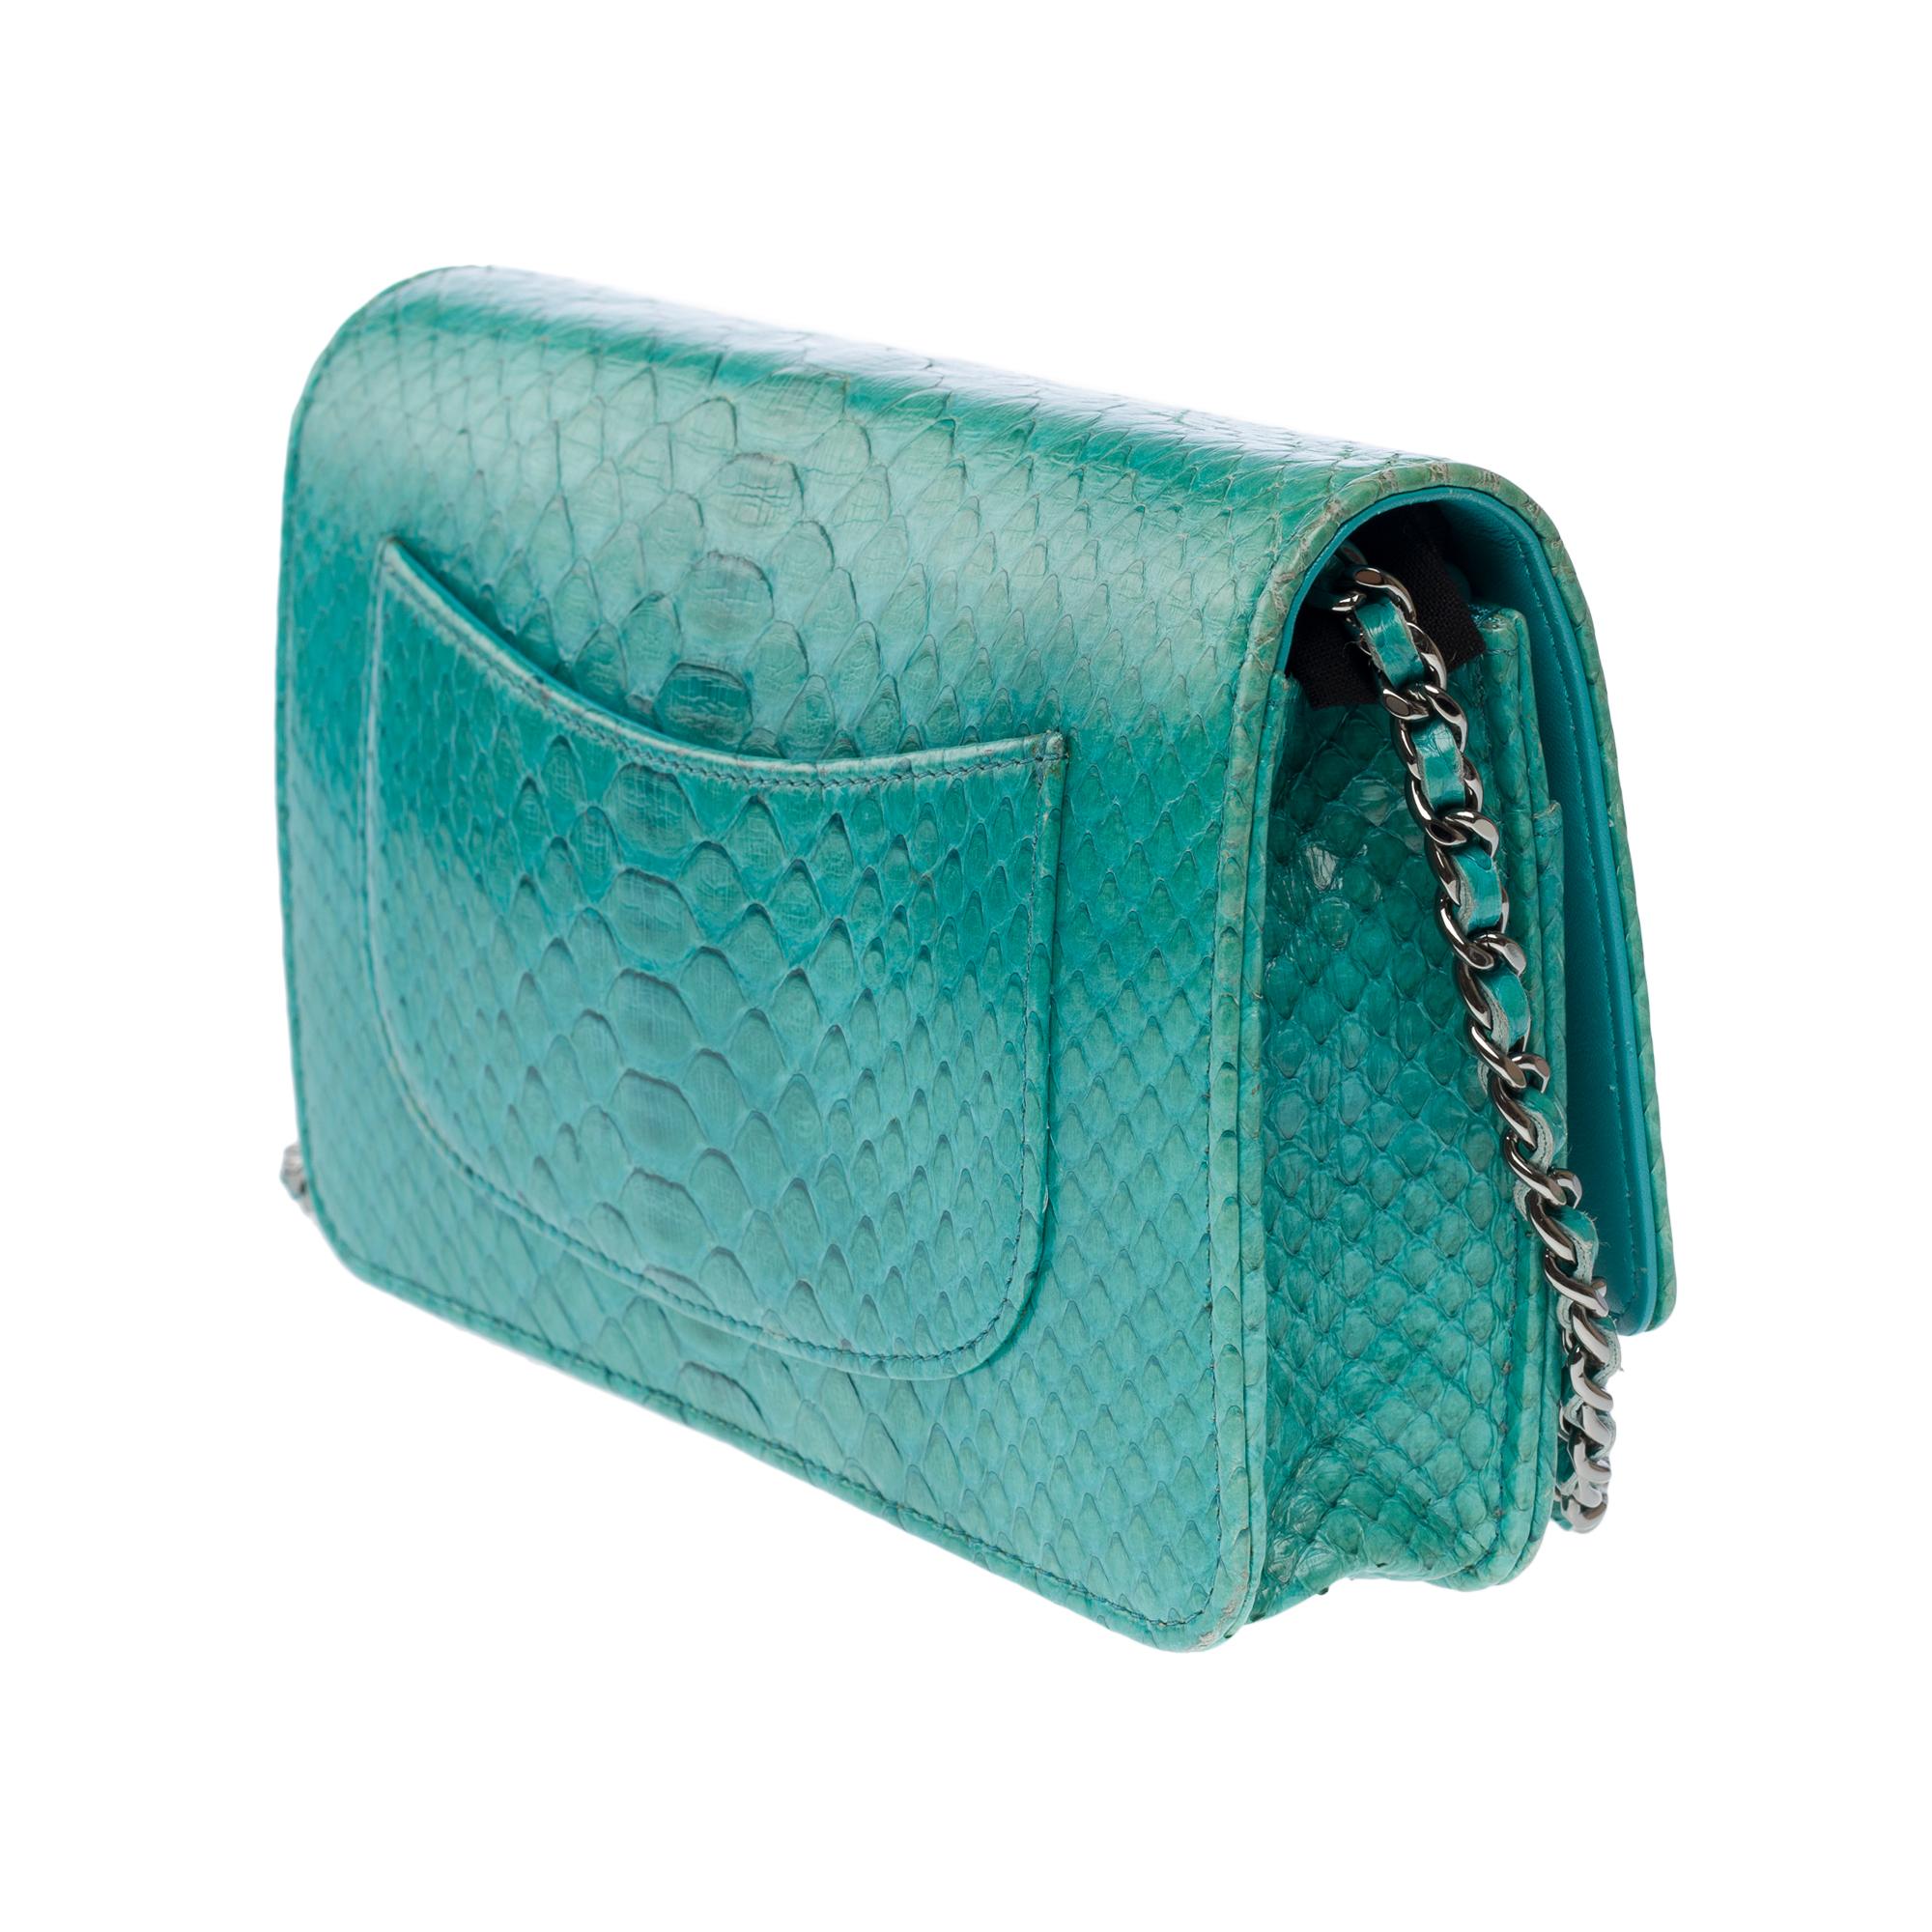 Chanel Wallet on Chain (WOC)  shoulder bag in Turquoise Blue Python leather, SHW 3